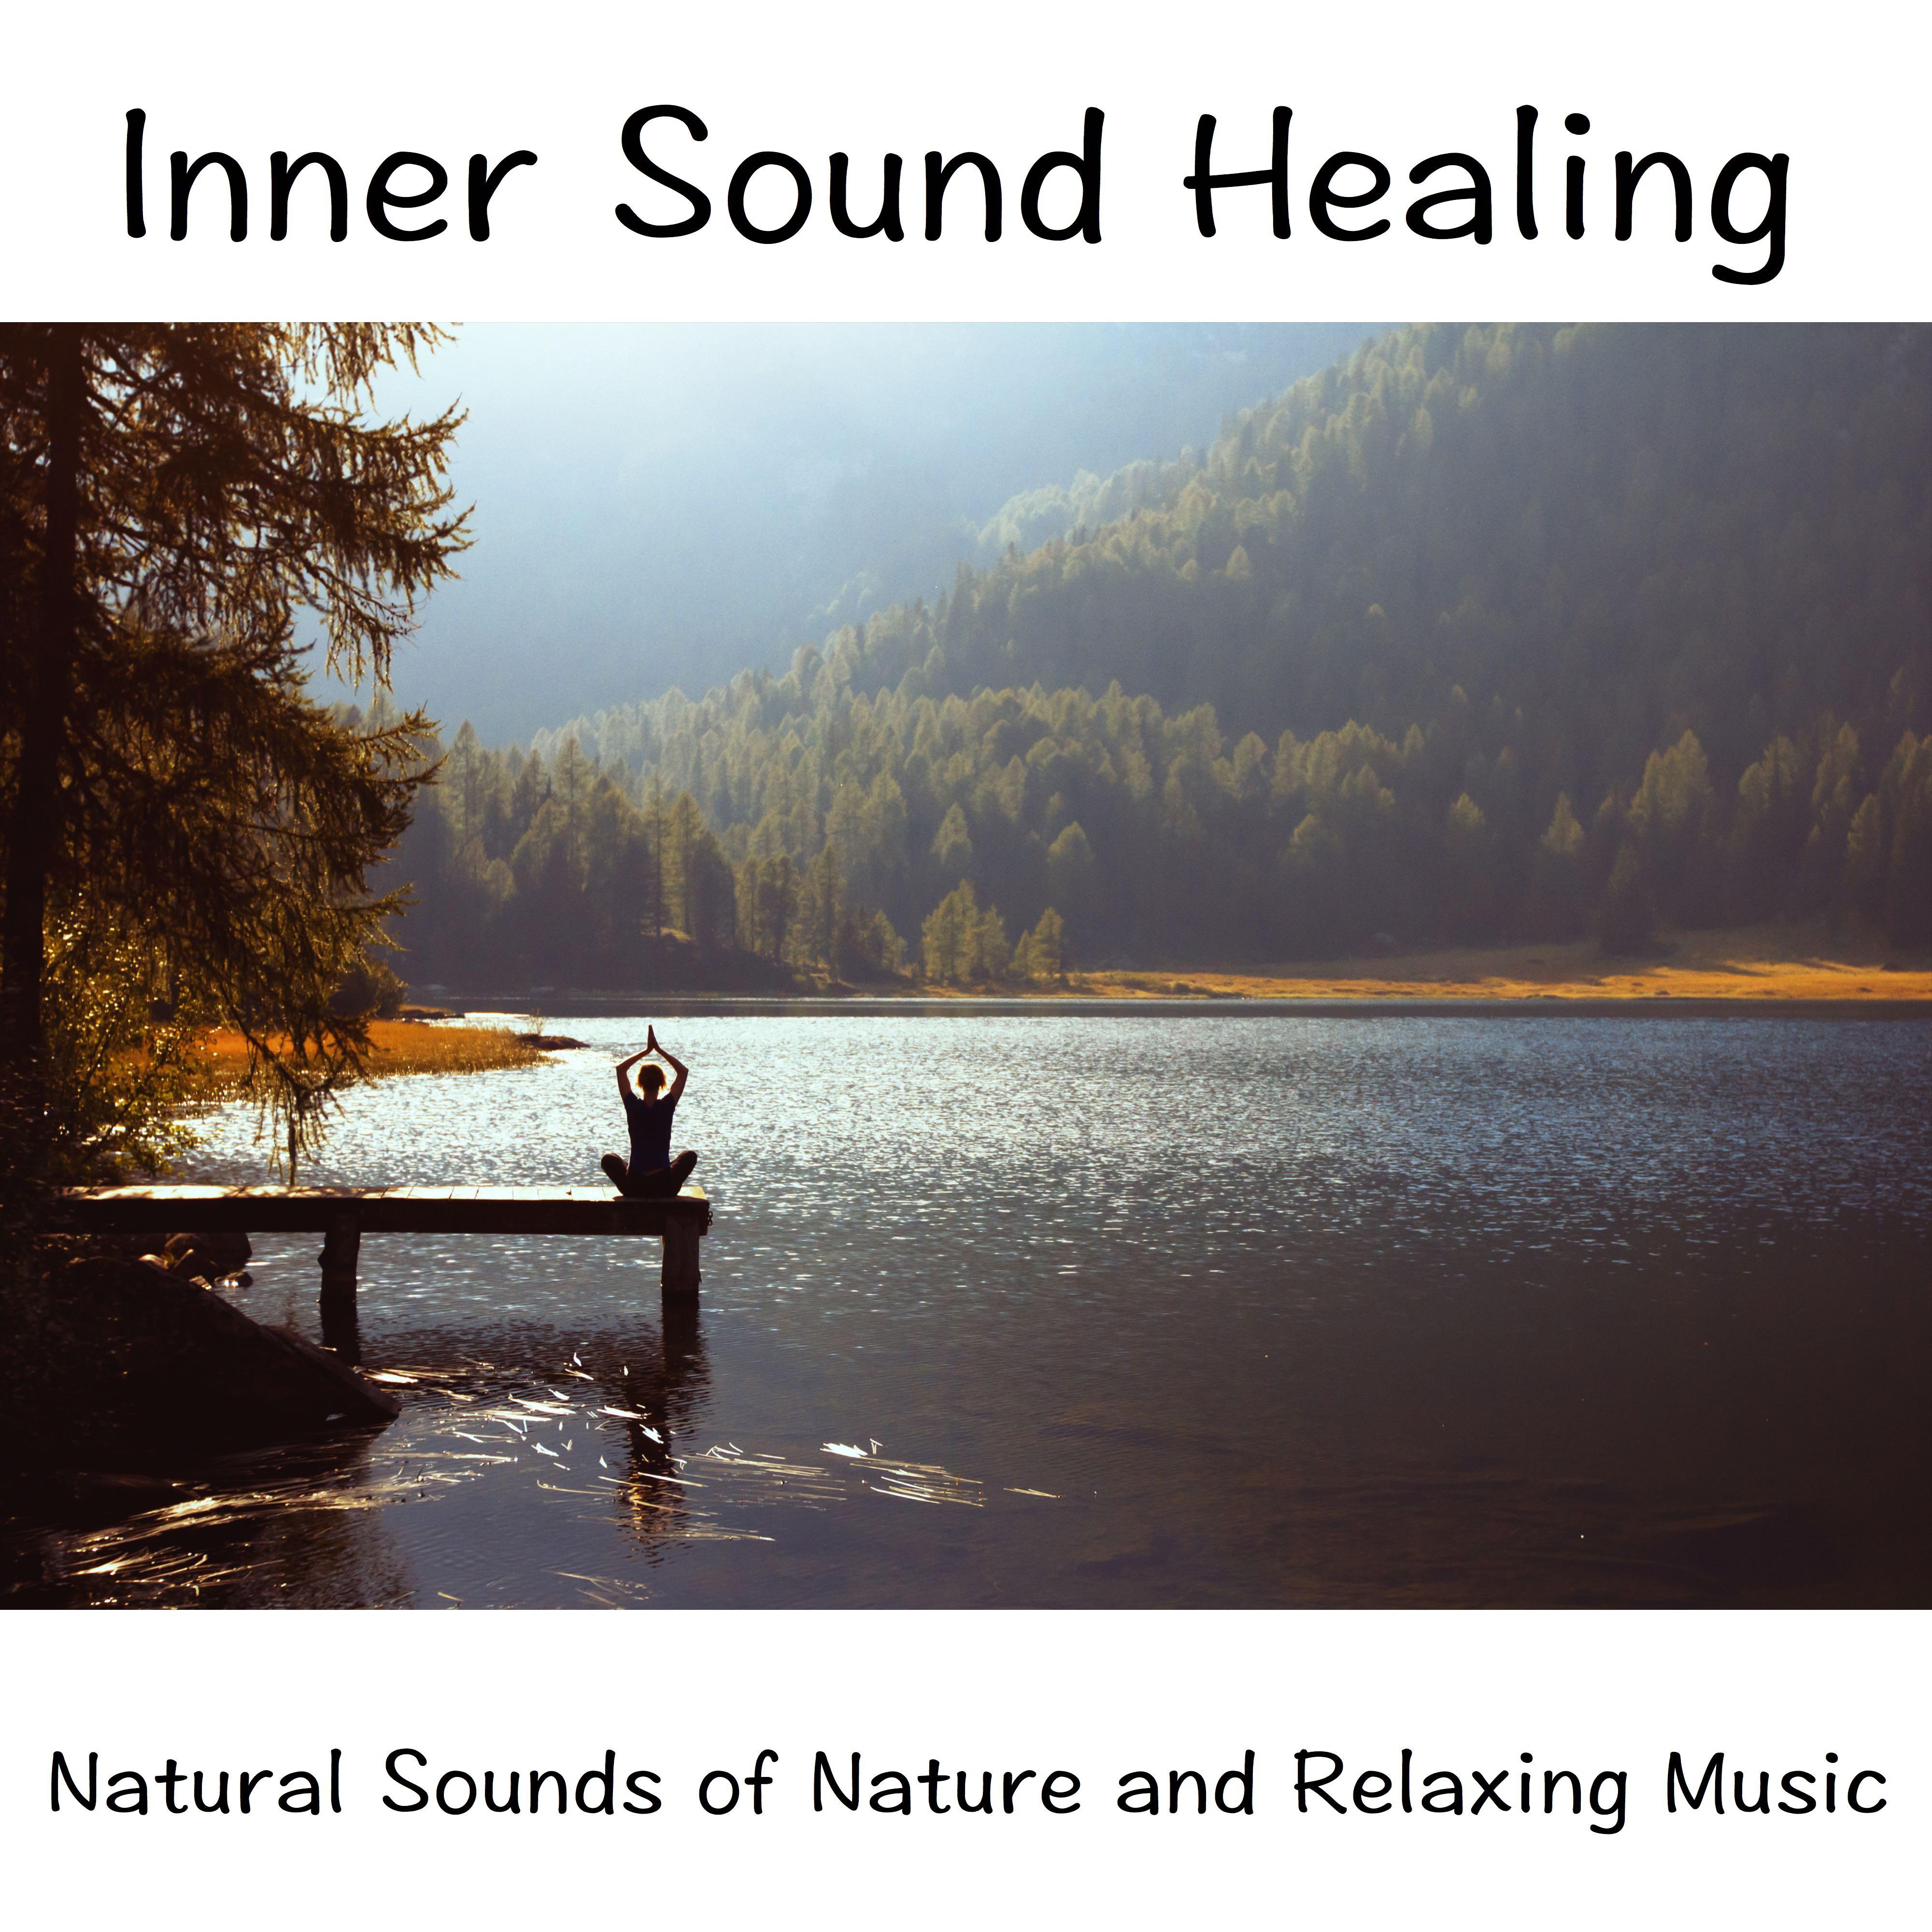 Inner Sound Healing: Natural Sounds of Nature and Relaxing Music for Reiki and Yoga